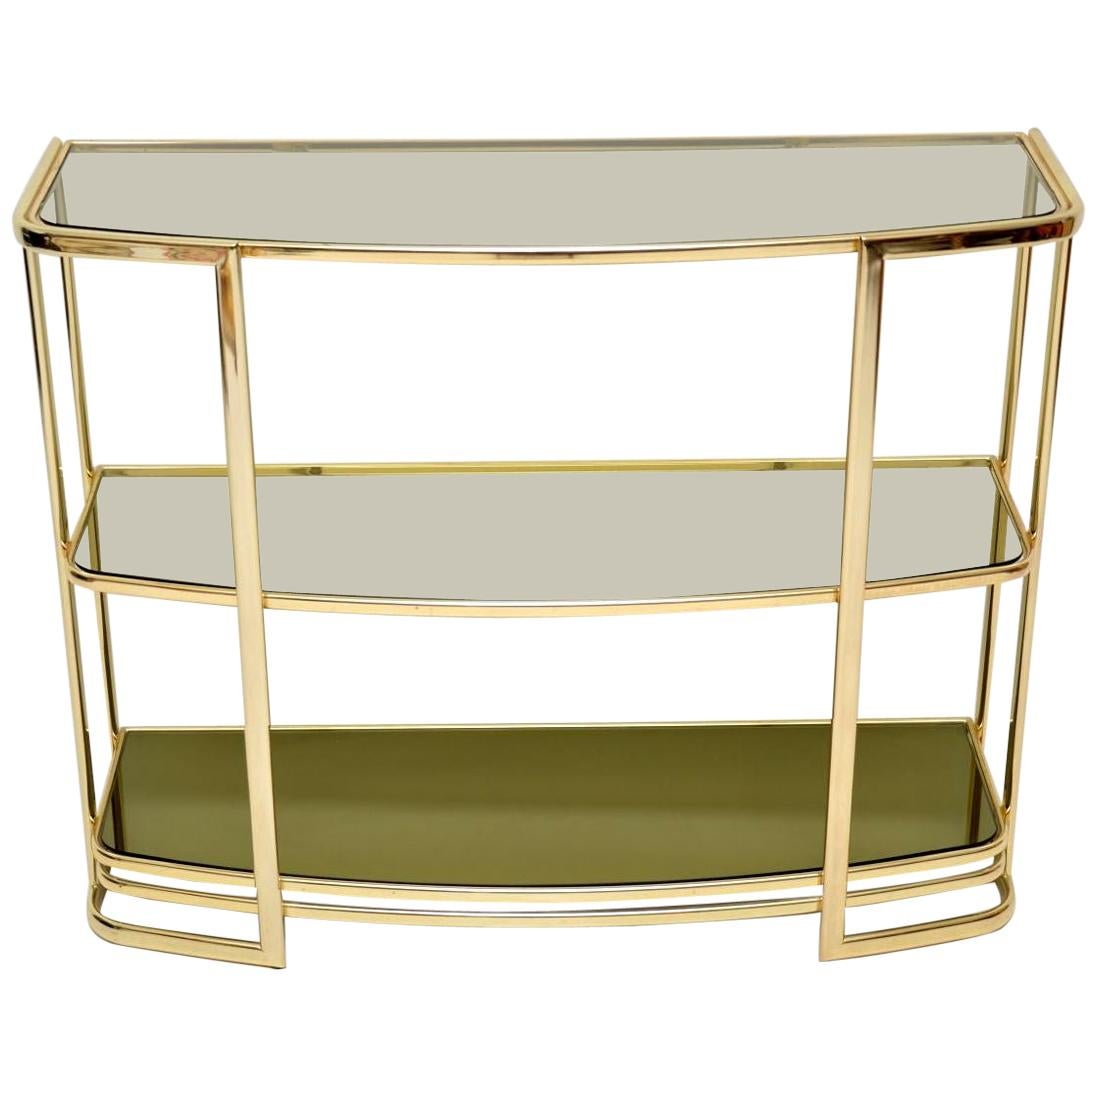 1970s Vintage Italian Brass Console Table or Bookcase